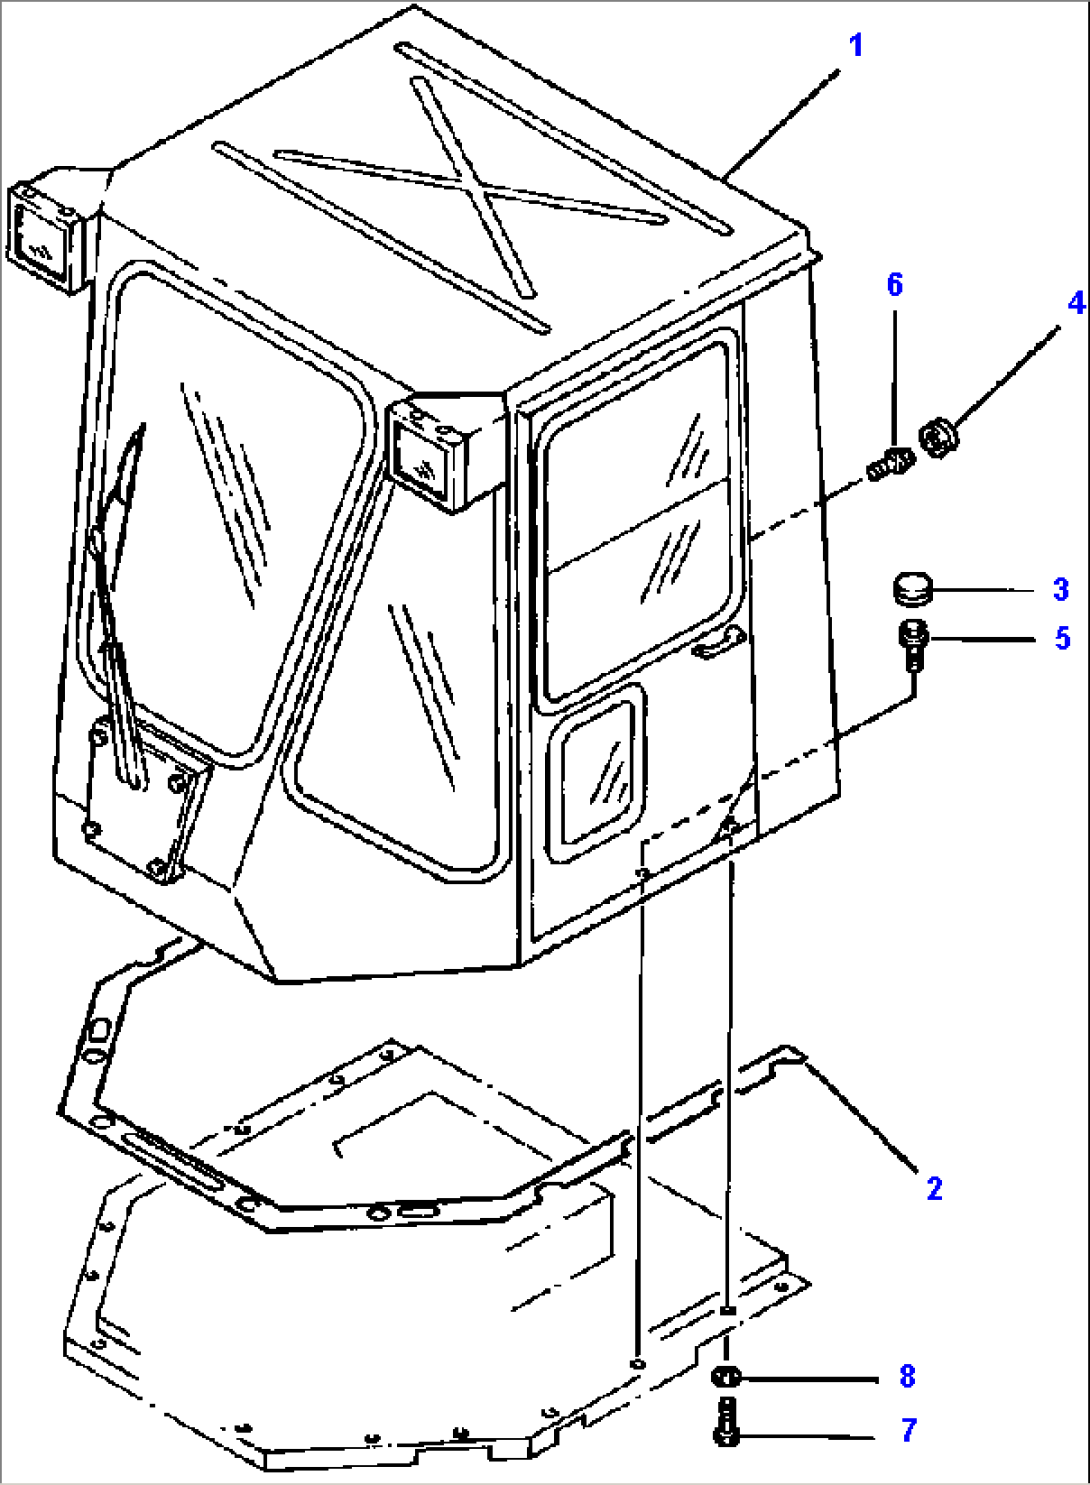 FIG NO. 5441 OPERATORS CAB AND MOUNTING